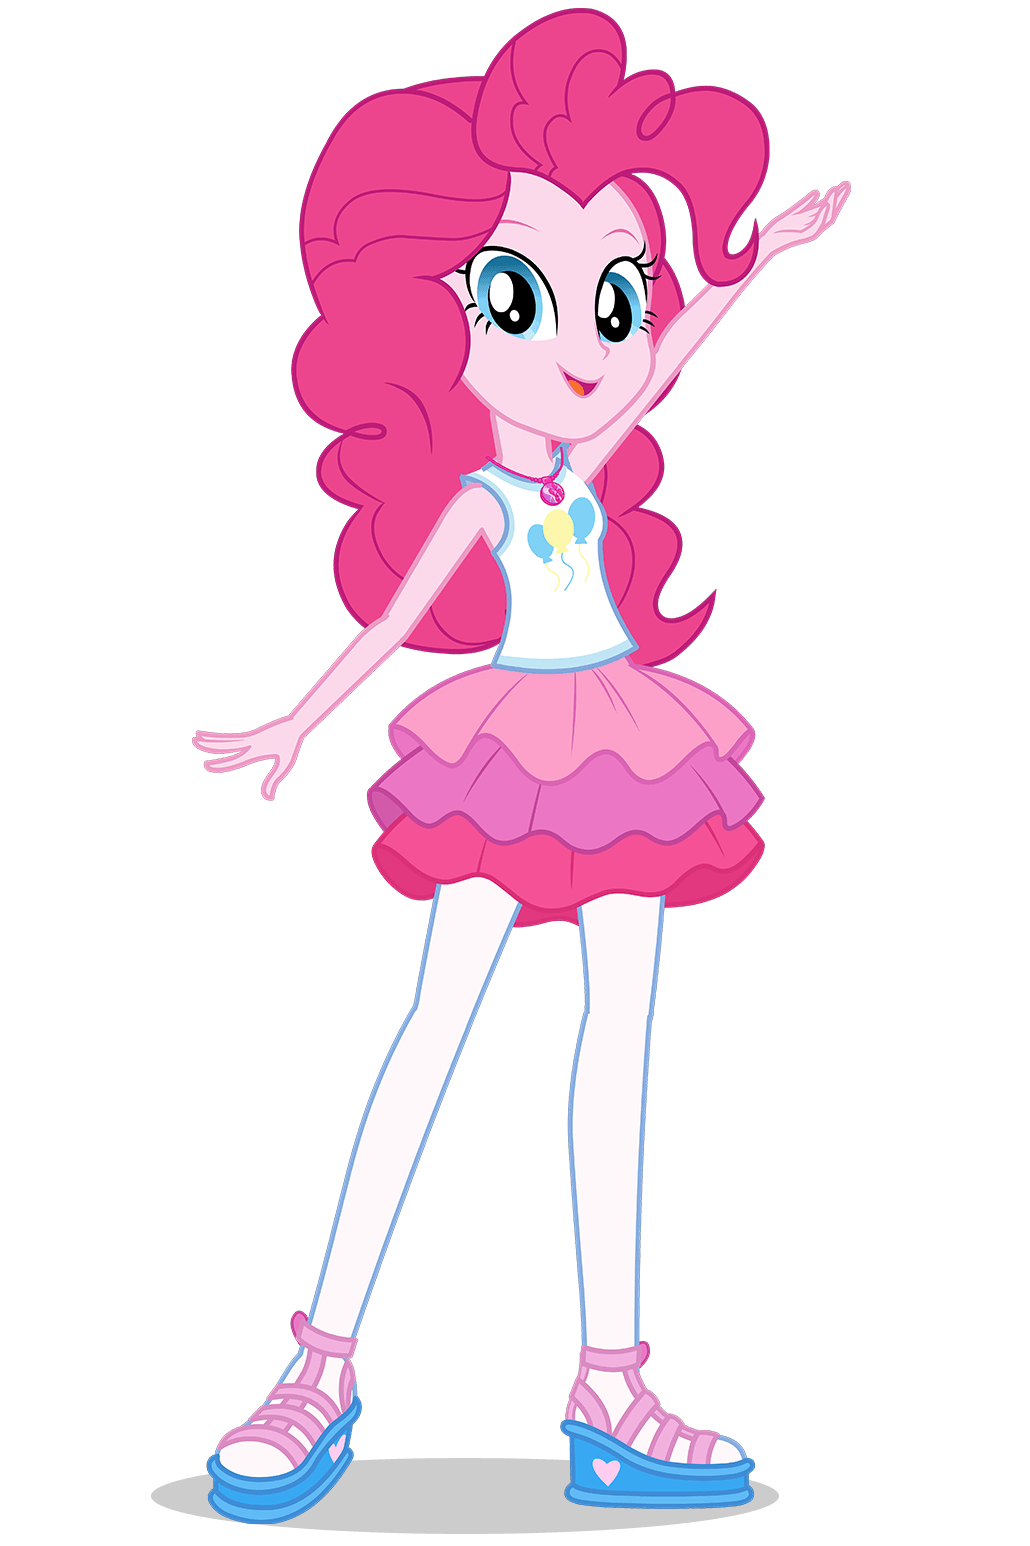 Is Pinkie Pie a girl?